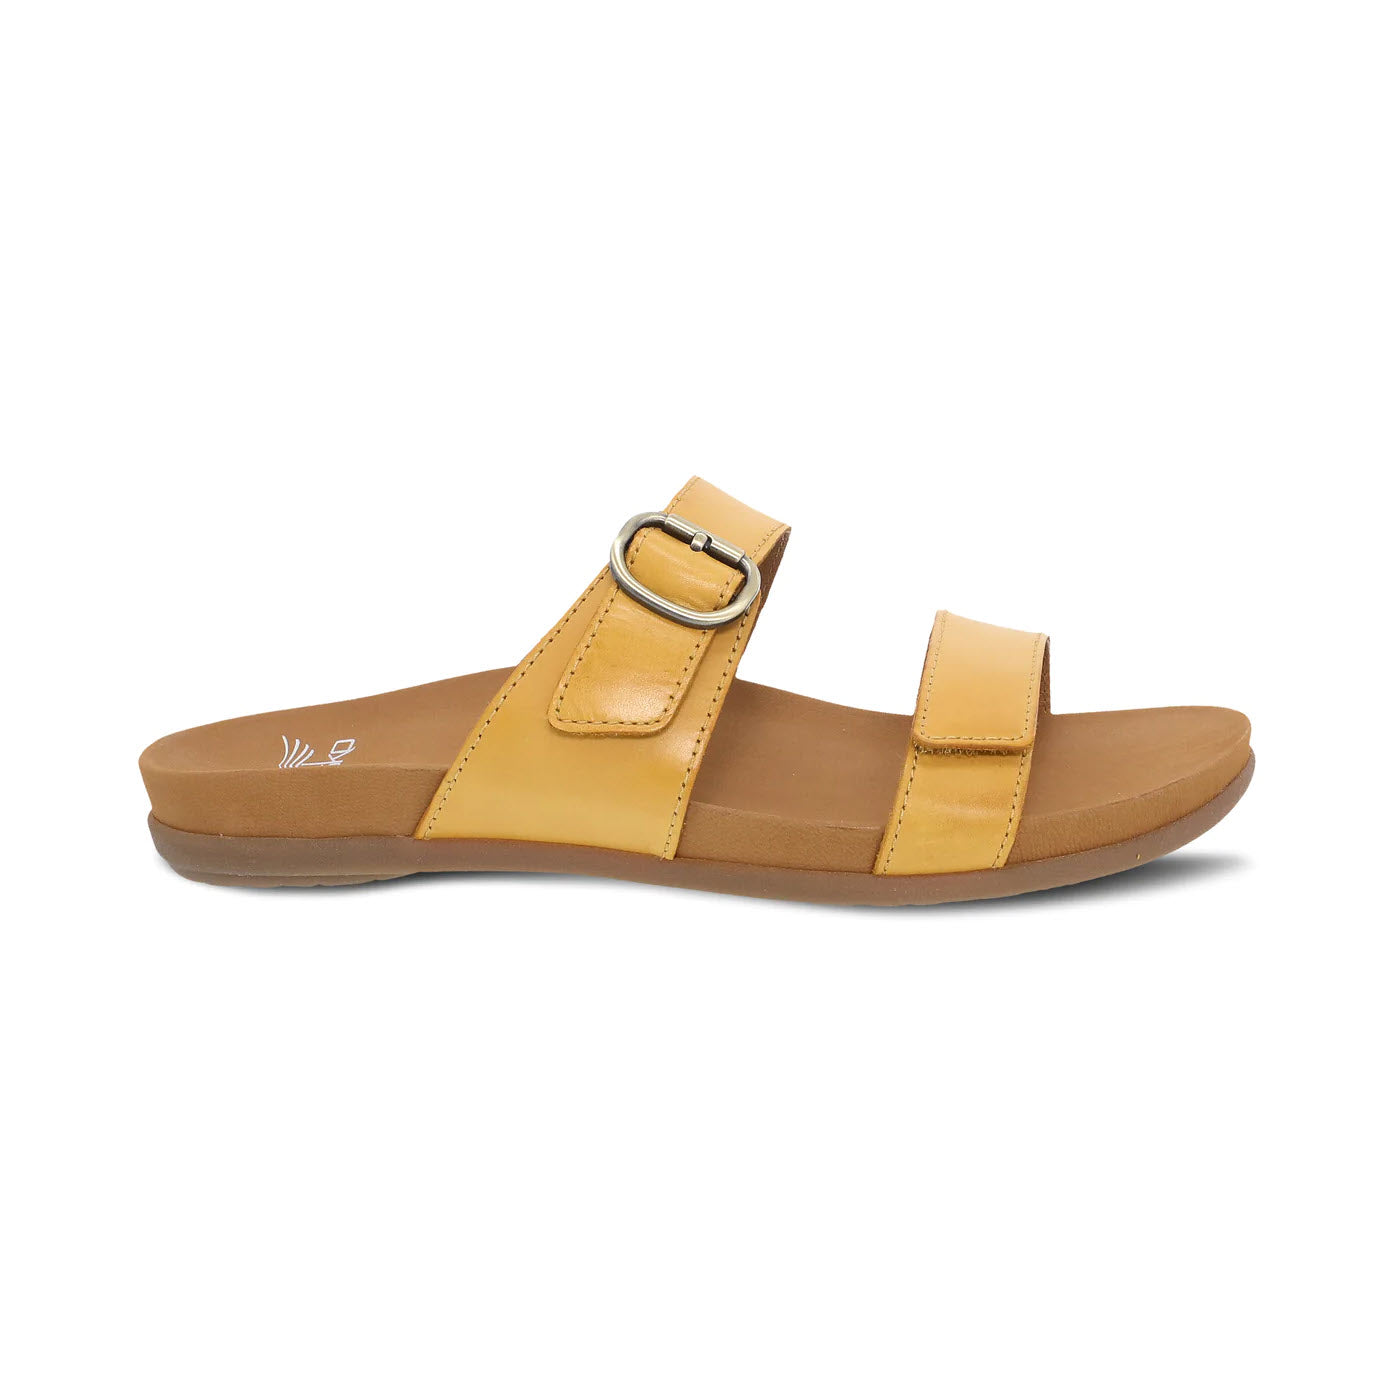 A single yellow leather slide sandal with a buckle on the ankle strap, displayed against a white background.